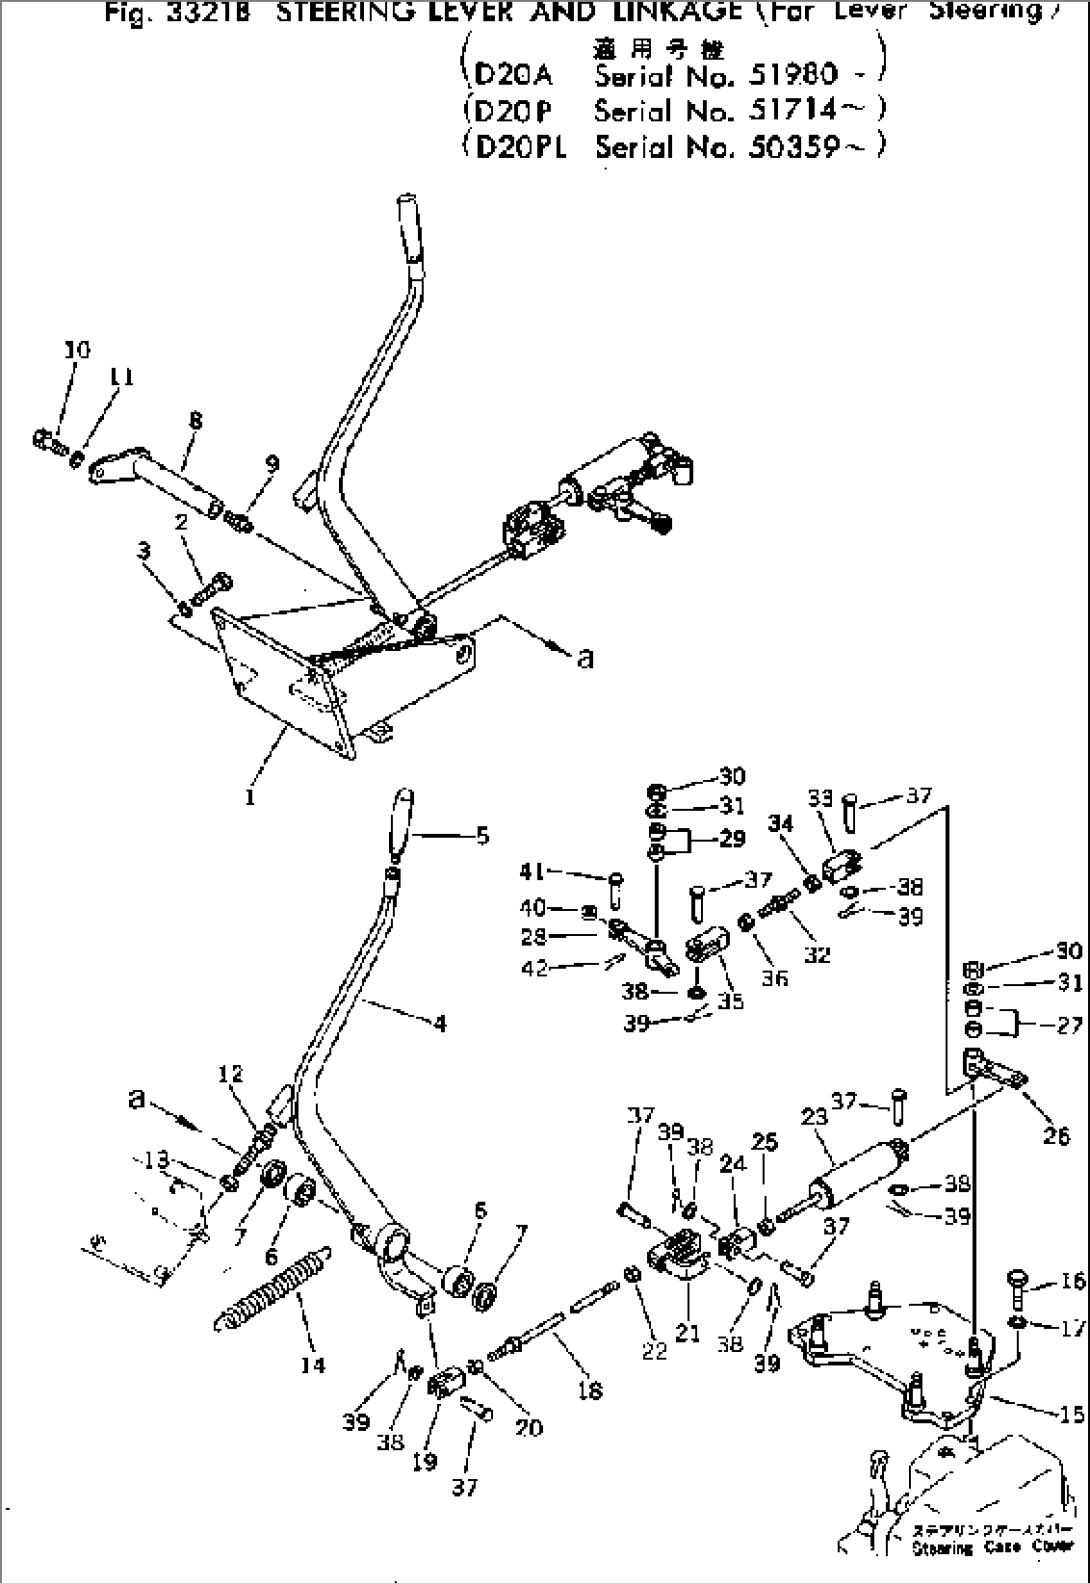 STEERING LEVER AND LINKAGE (FOR LEVER STEERING)(#51714-)